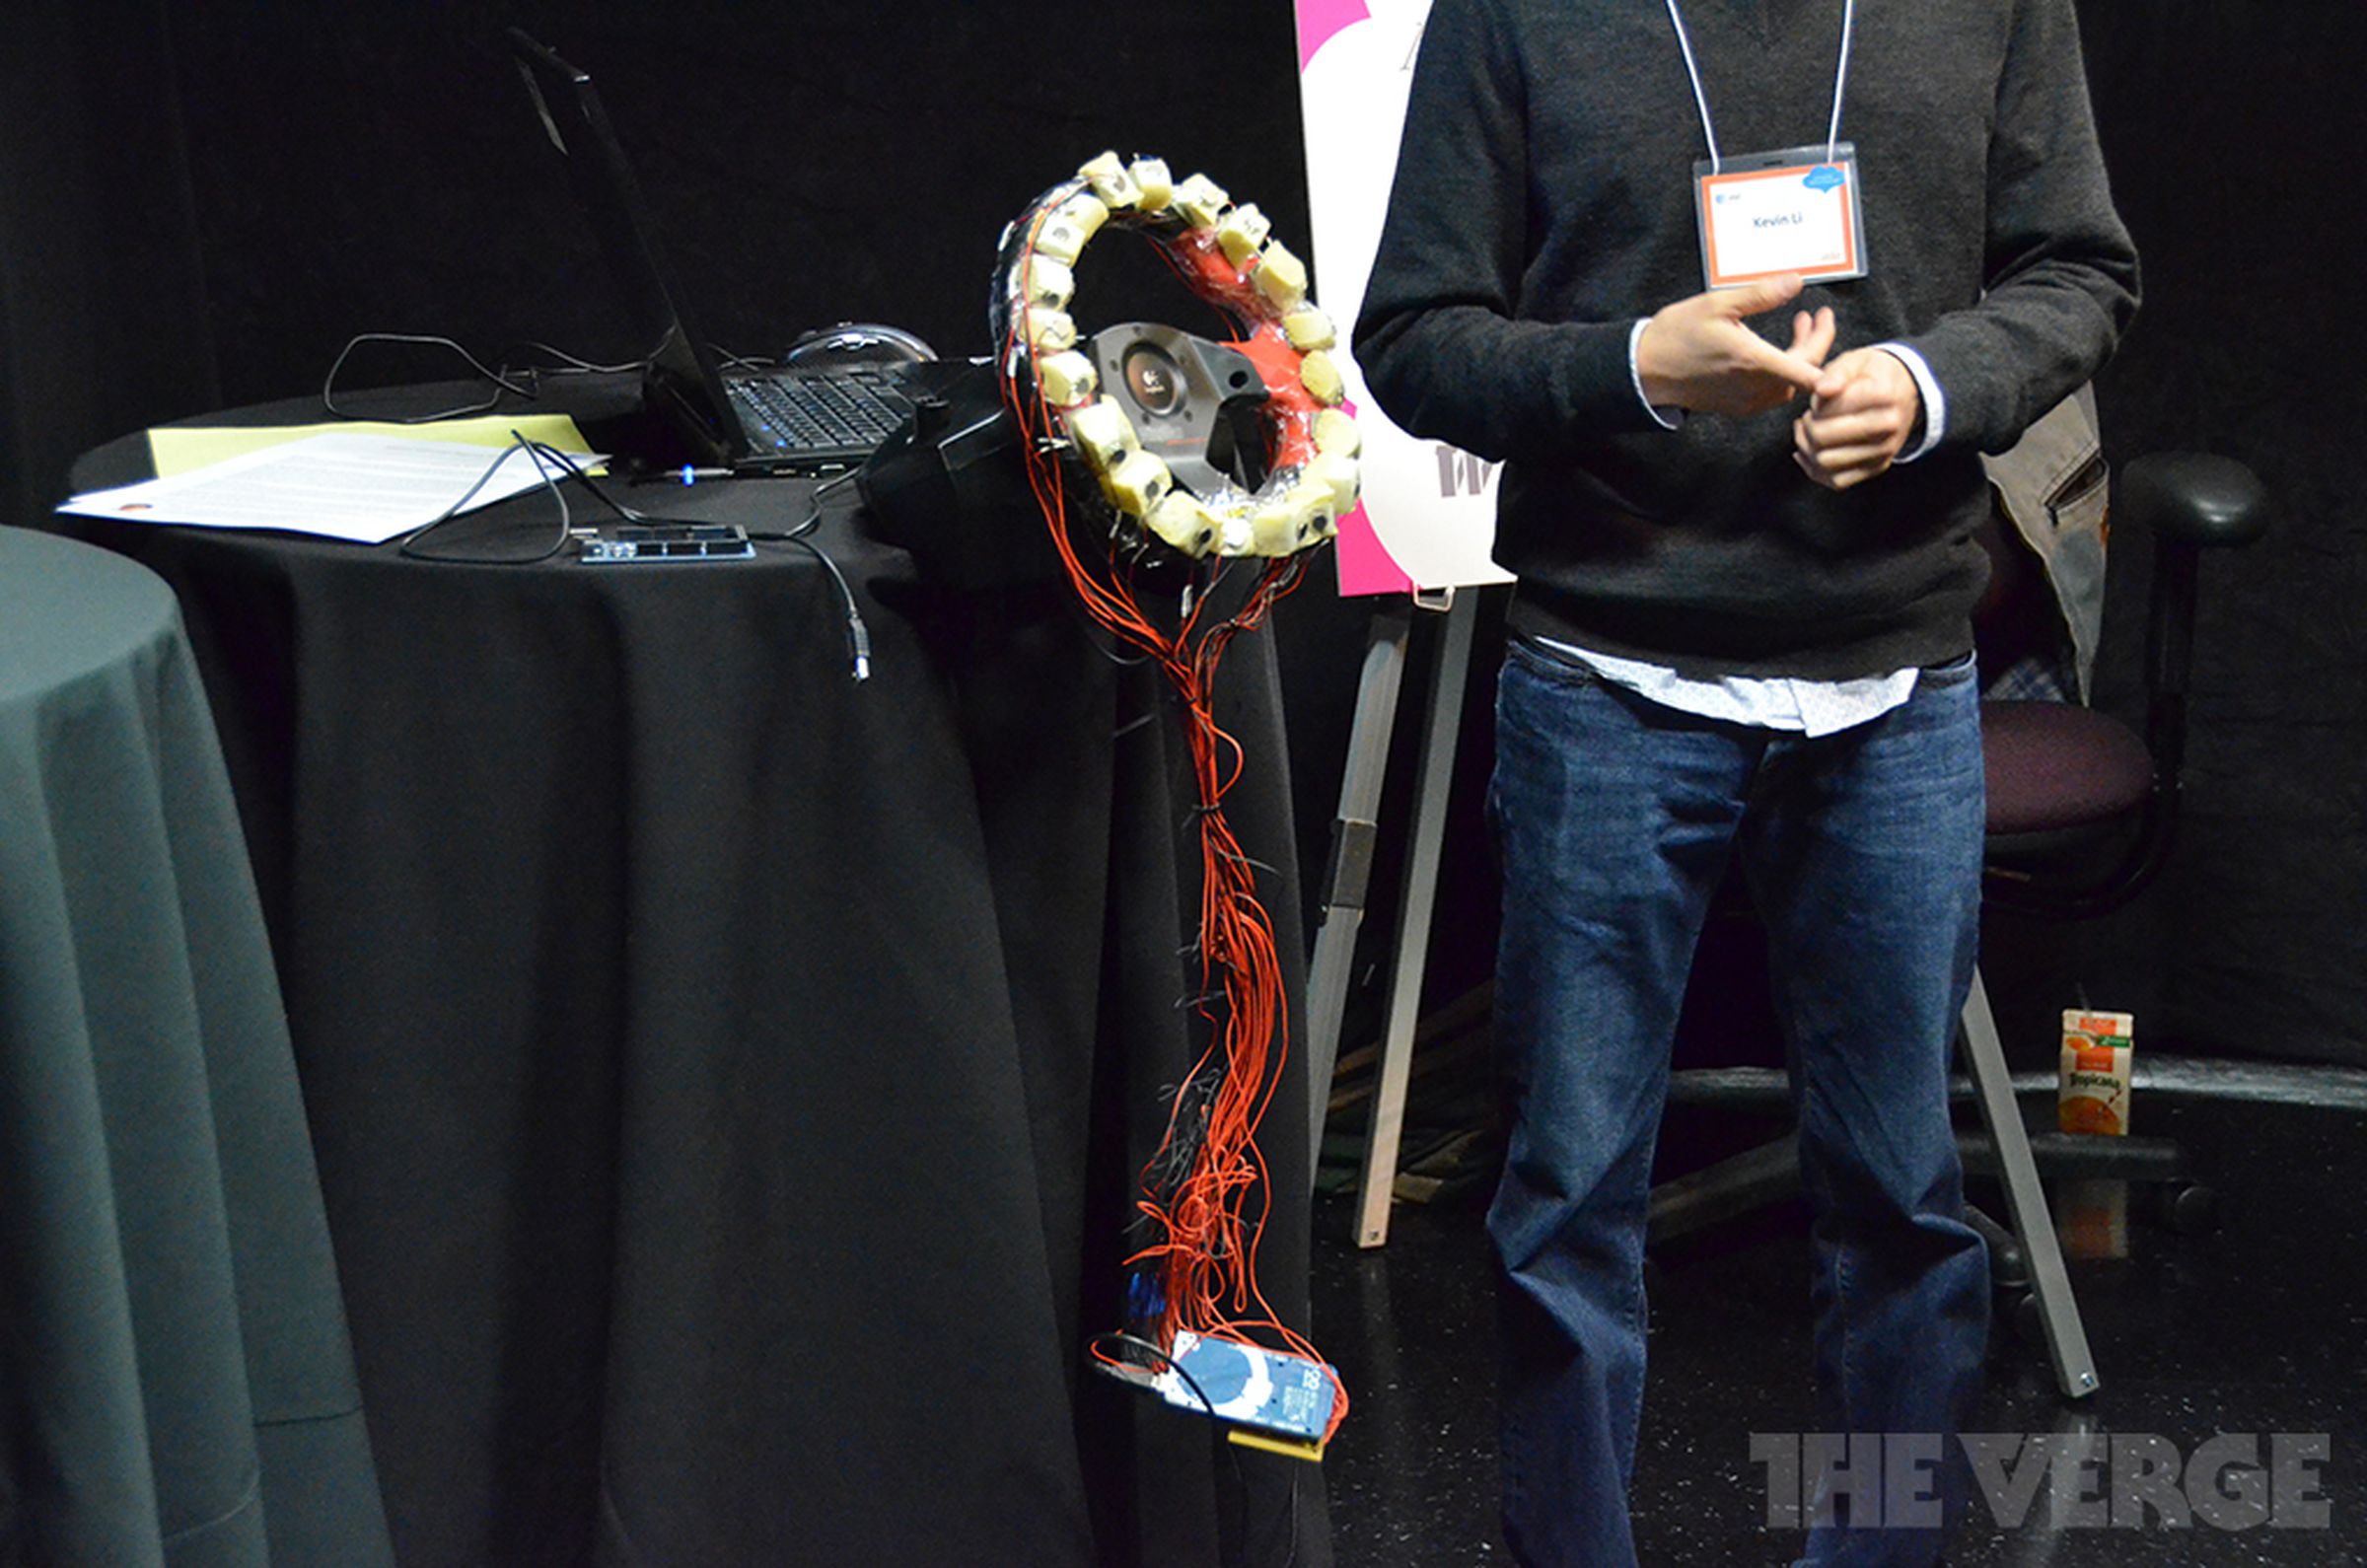 AT&T Labs haptic feedback steering wheel prototype (hands-on pictures)